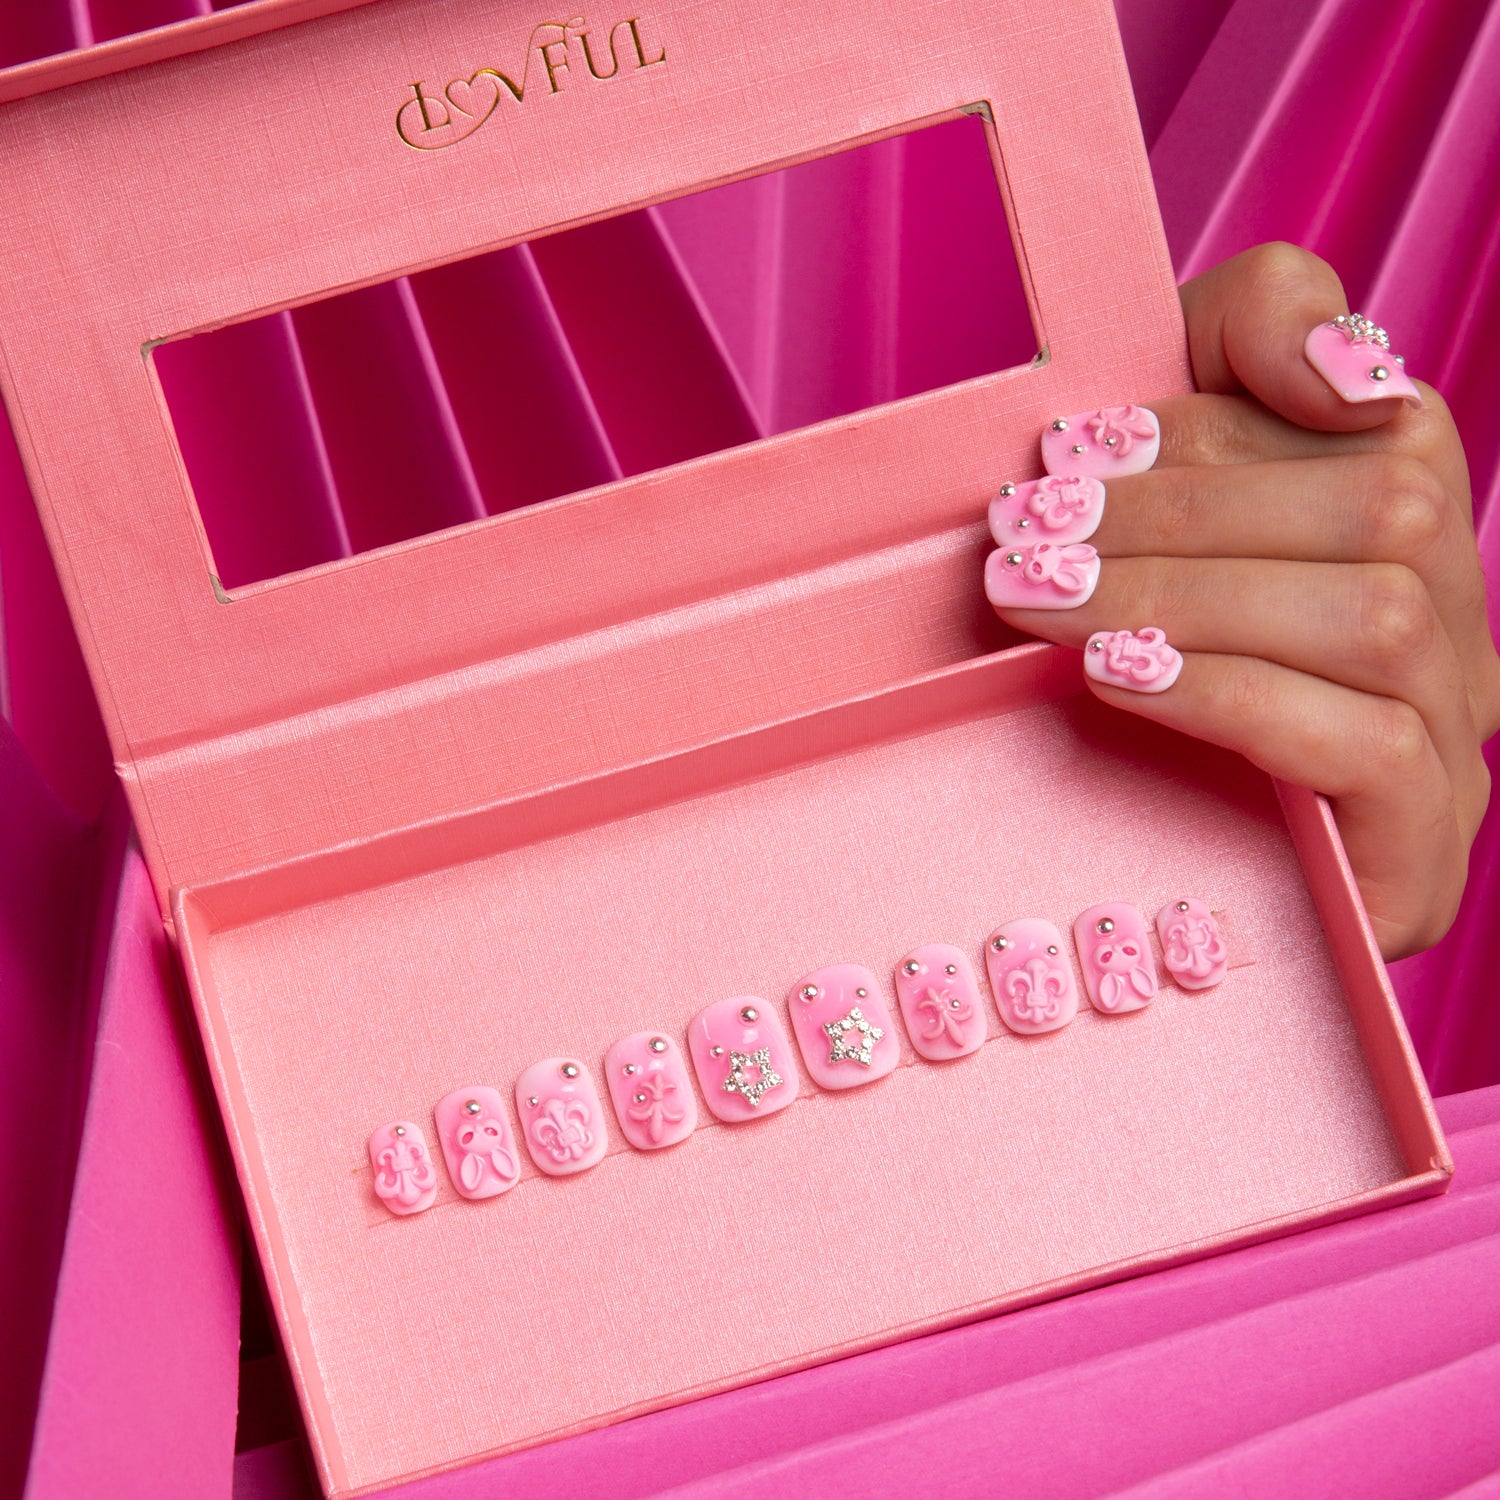 Lovful Pink Bliss Blush press-on nails set with 3D decorations including crosses, hearts, and cat designs, displayed in a branded box held by a hand.